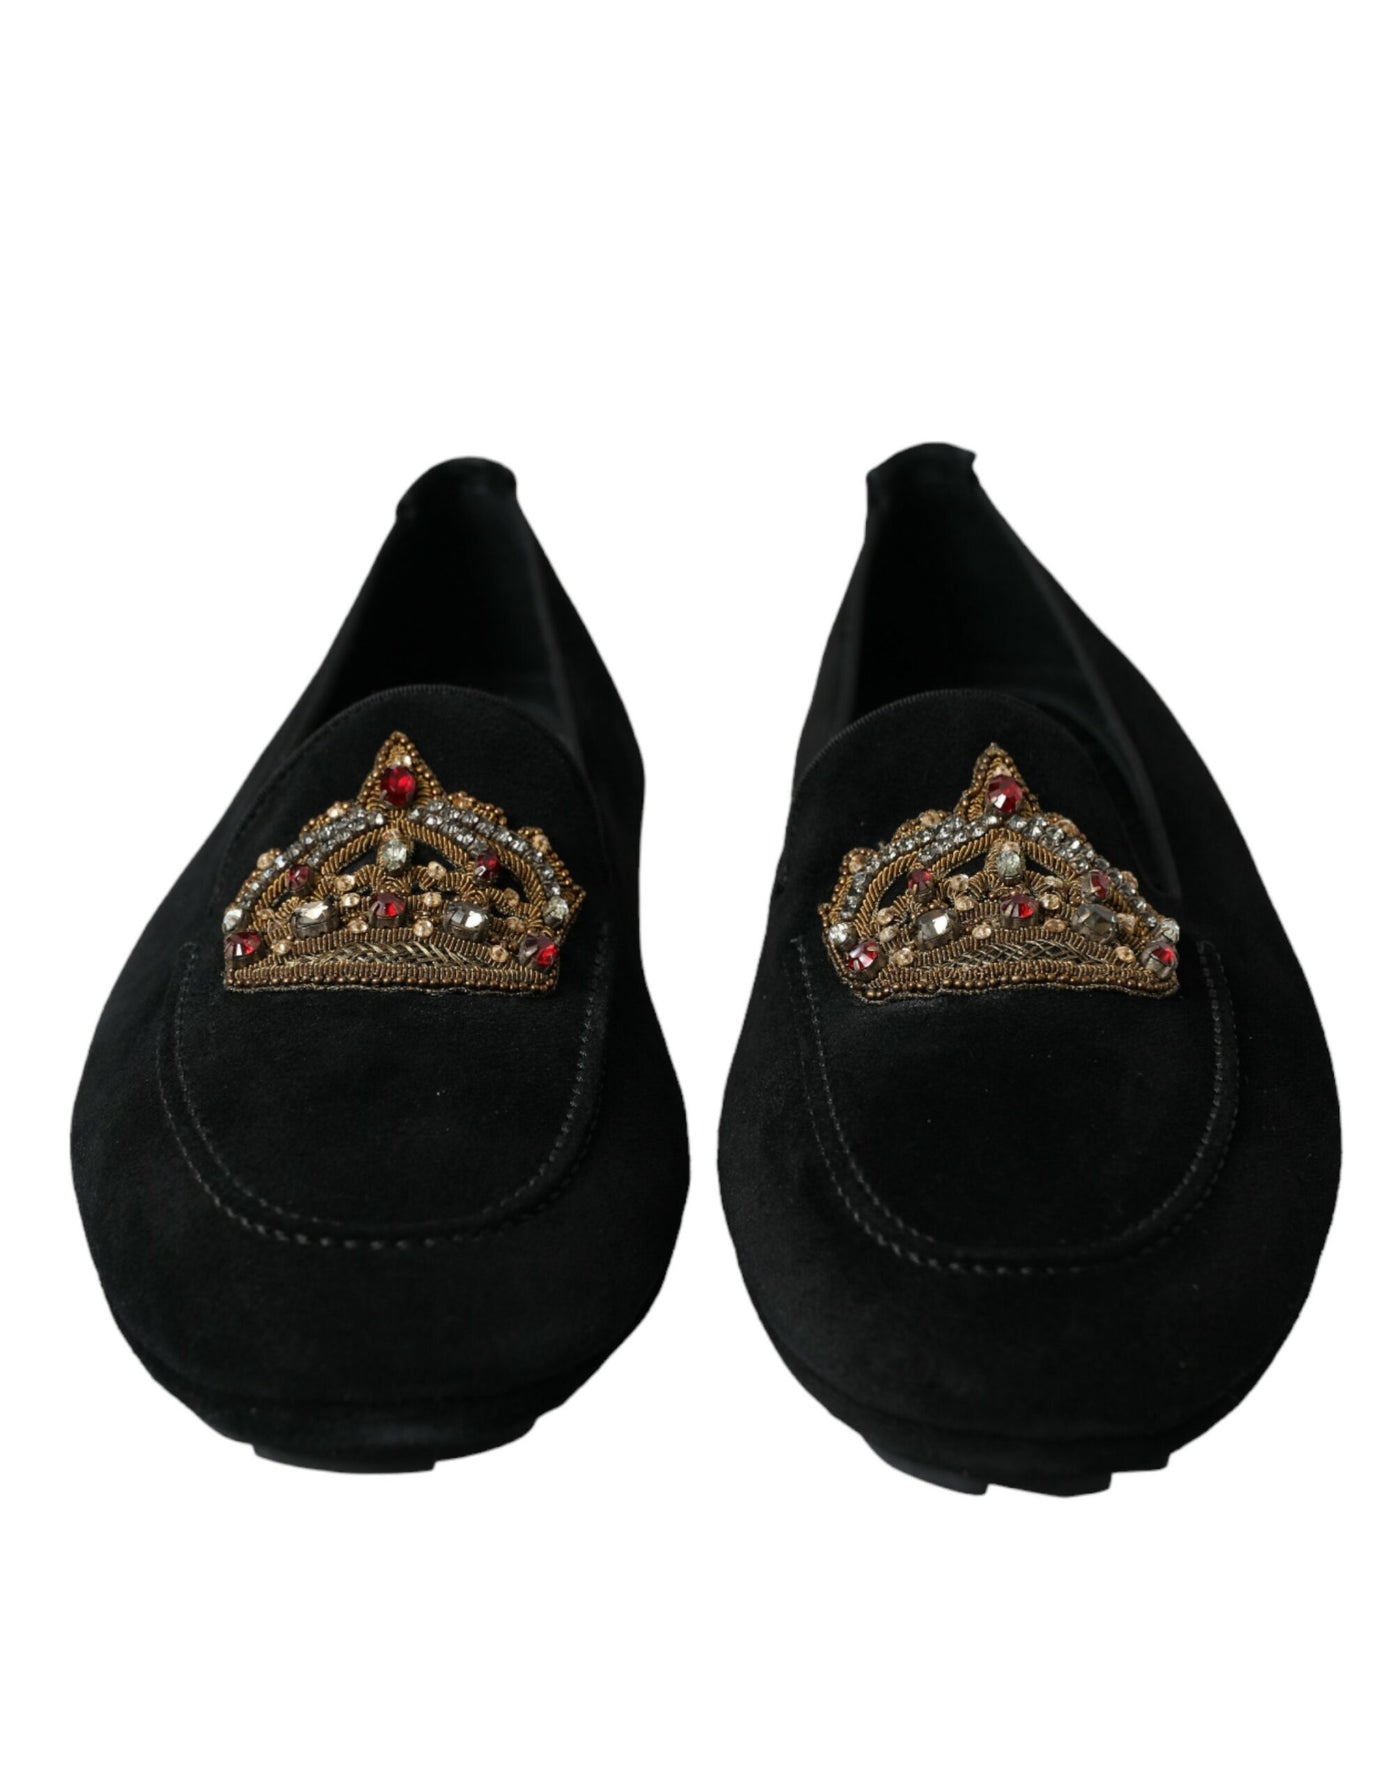 Dolce & Gabbana Black Leather Crystal Crown Loafers Shoes